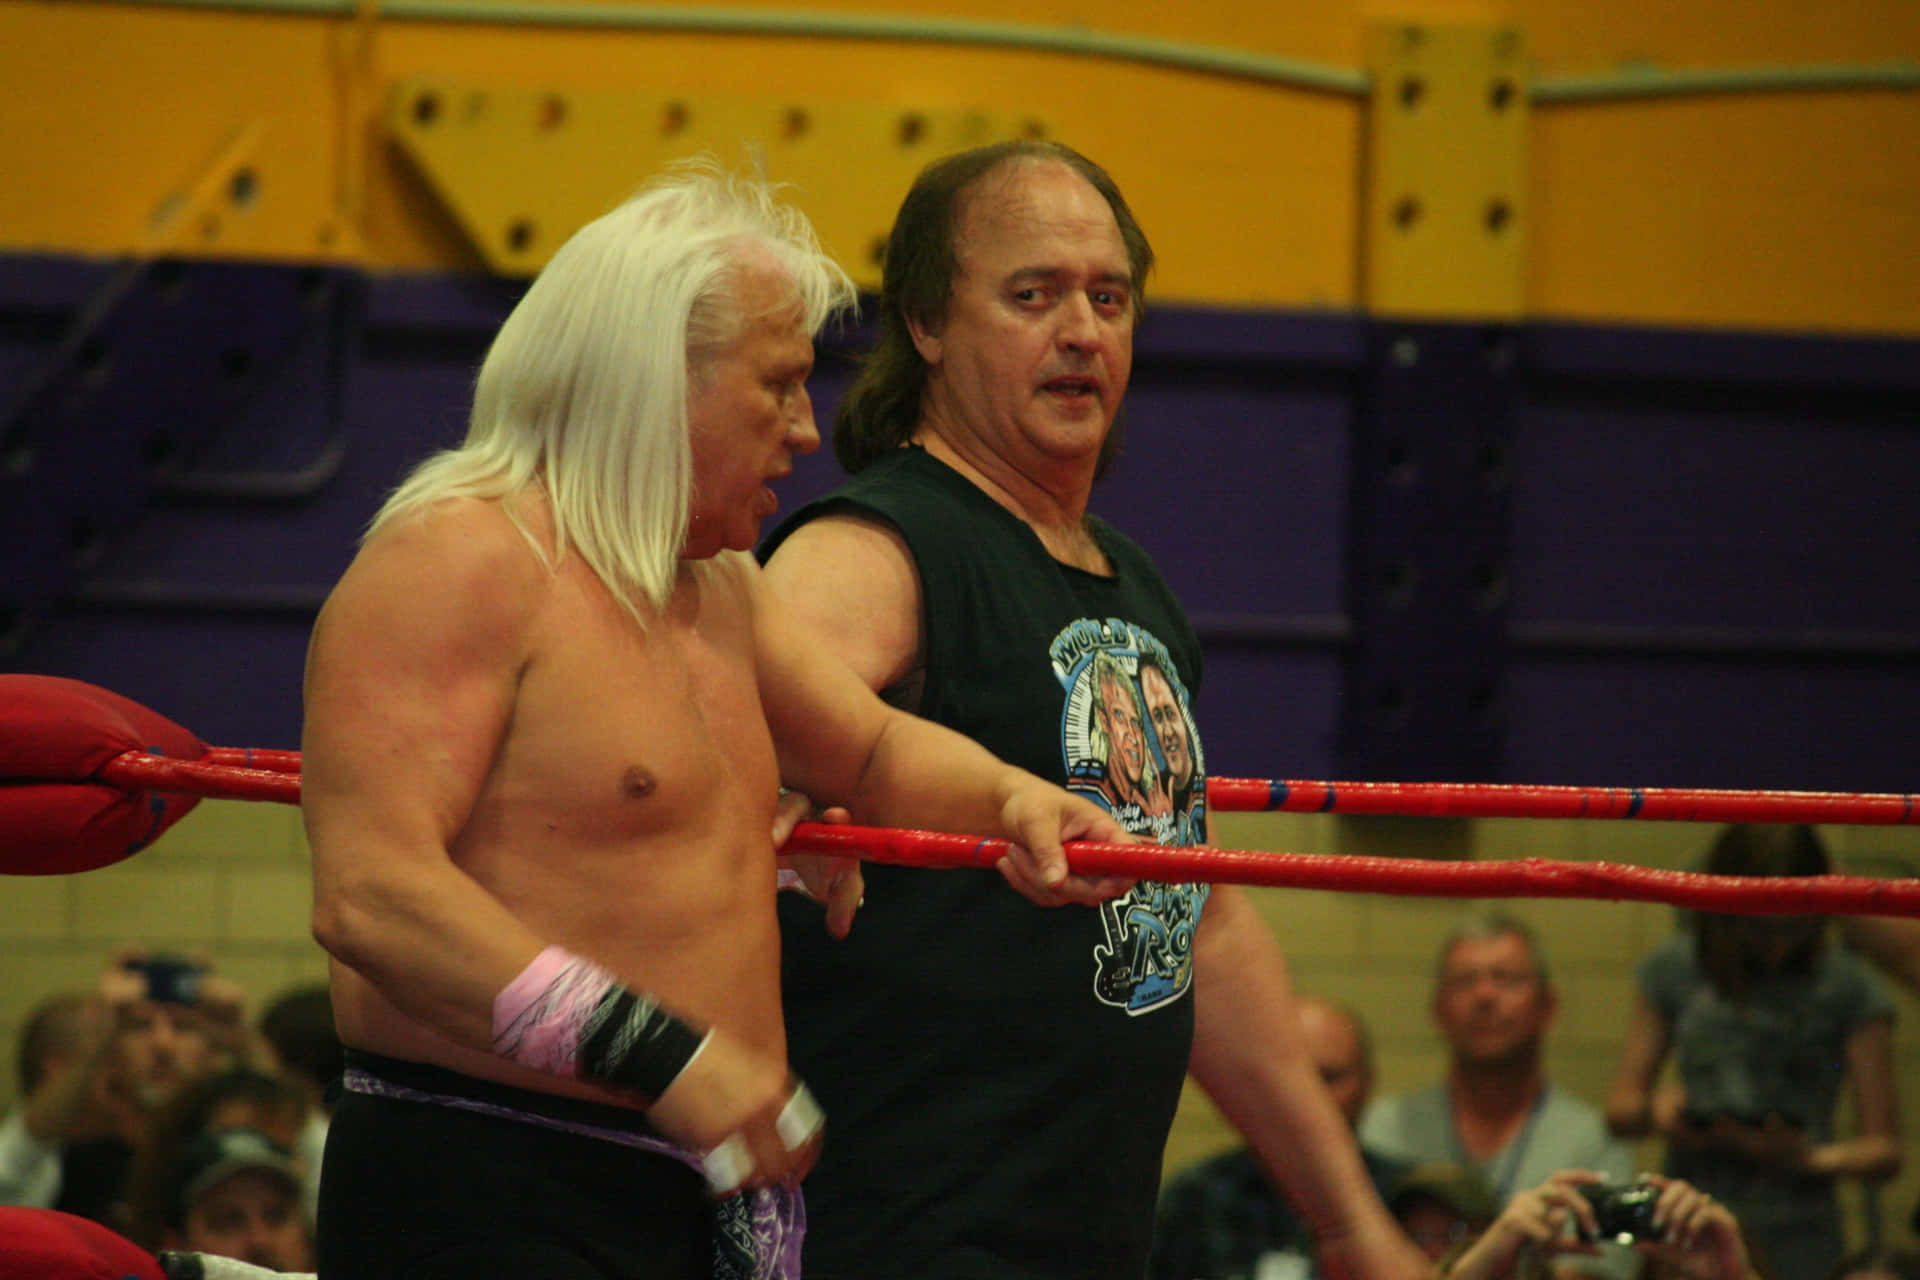 Ricky Morton - The Iconic Figure from the Rock 'n' Roll Express Band Wallpaper